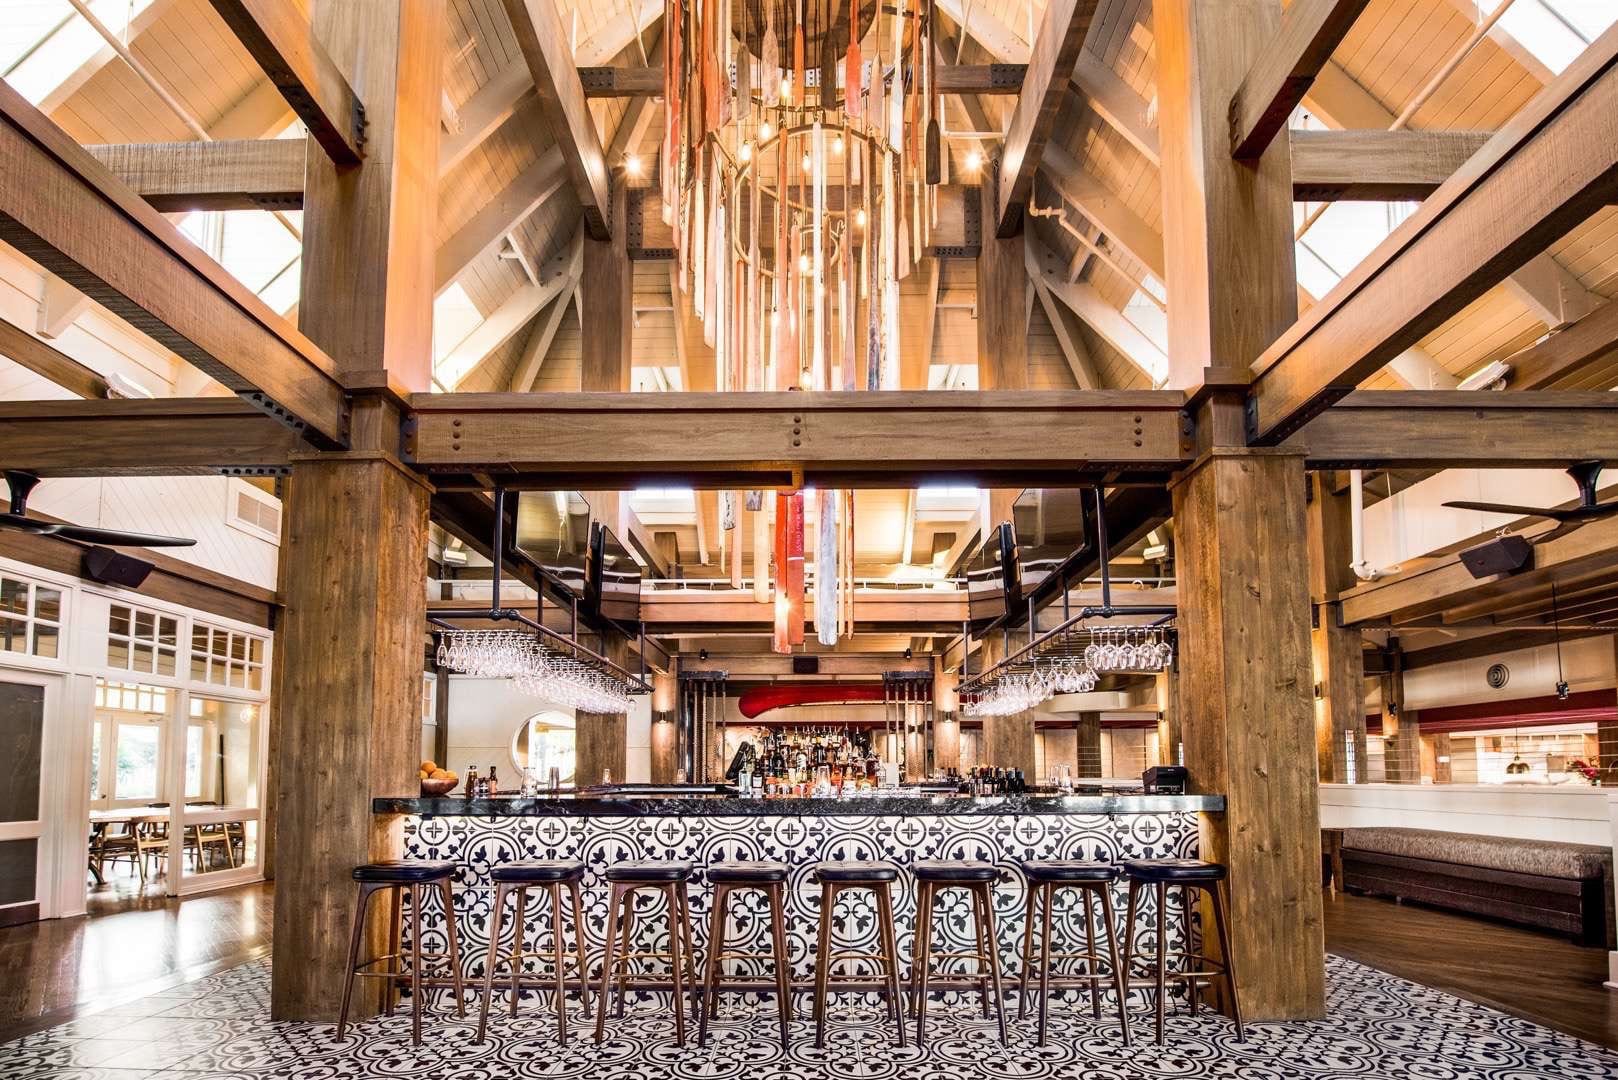 IU C&I Studios Portfolio The Restaurant People Chandelier with oars hanging from the ceiling over a bar with many barstools and tiled